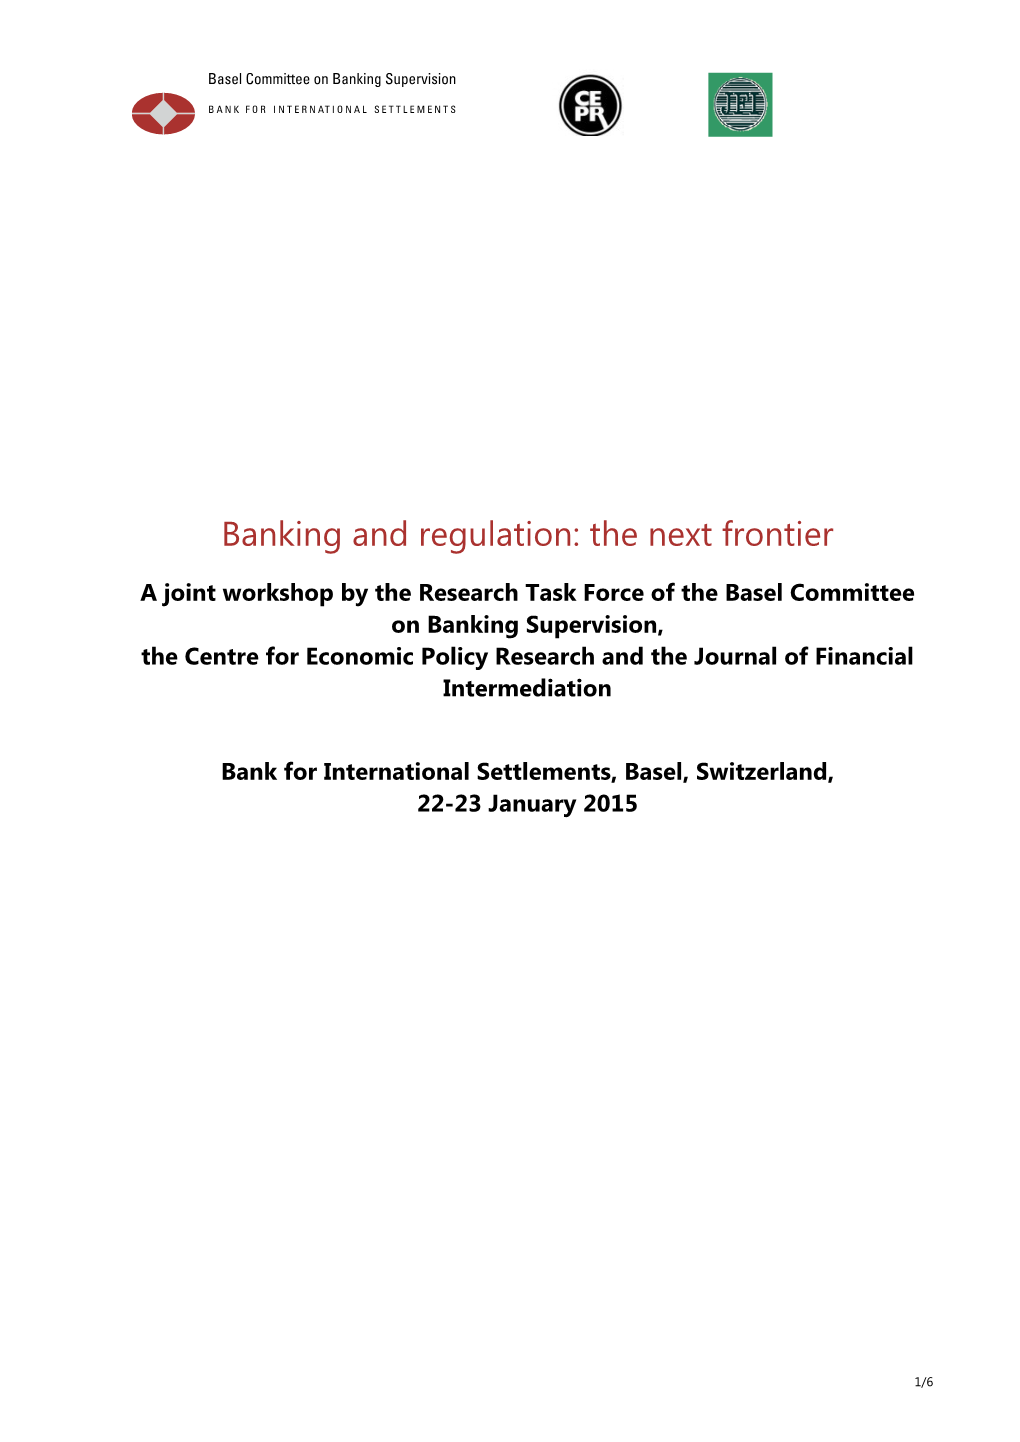 Programme of "Banking and Regulation: the Next Frontier", a Joint